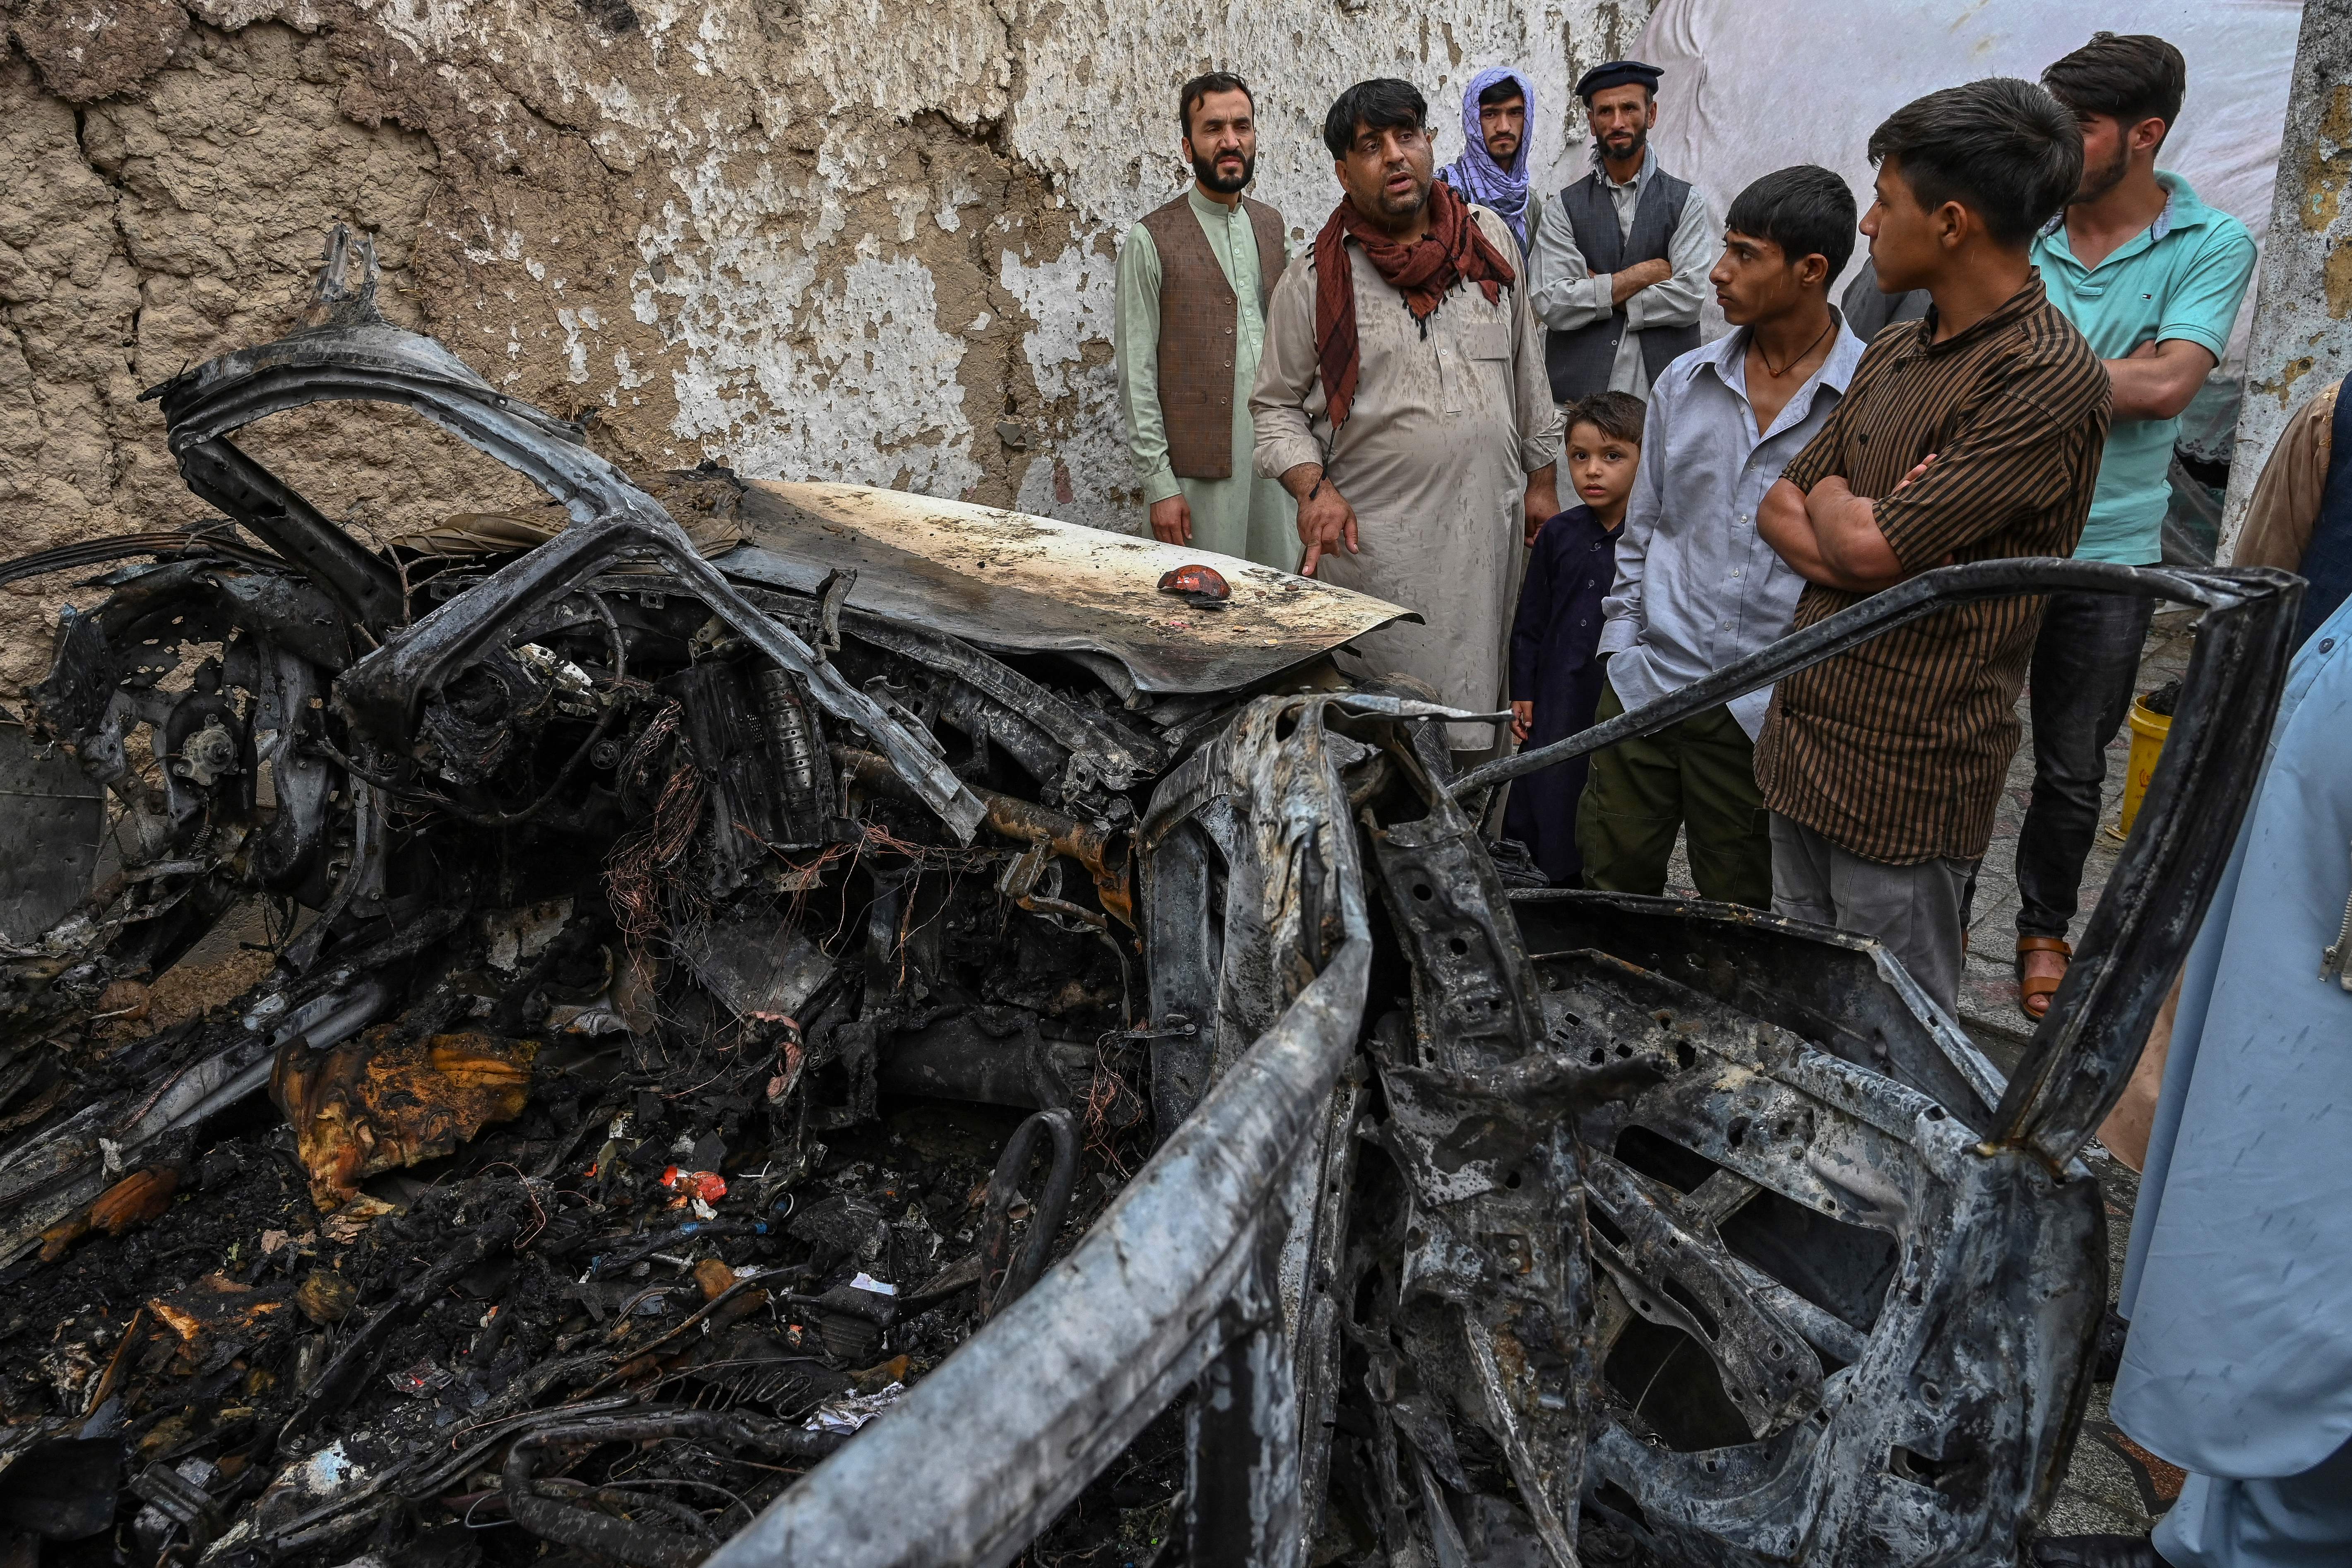 Afghan residents and family members of the victims gather next to a damaged vehicle inside a house, day after a US drone airstrike in Kabul on 30 August, 2021.